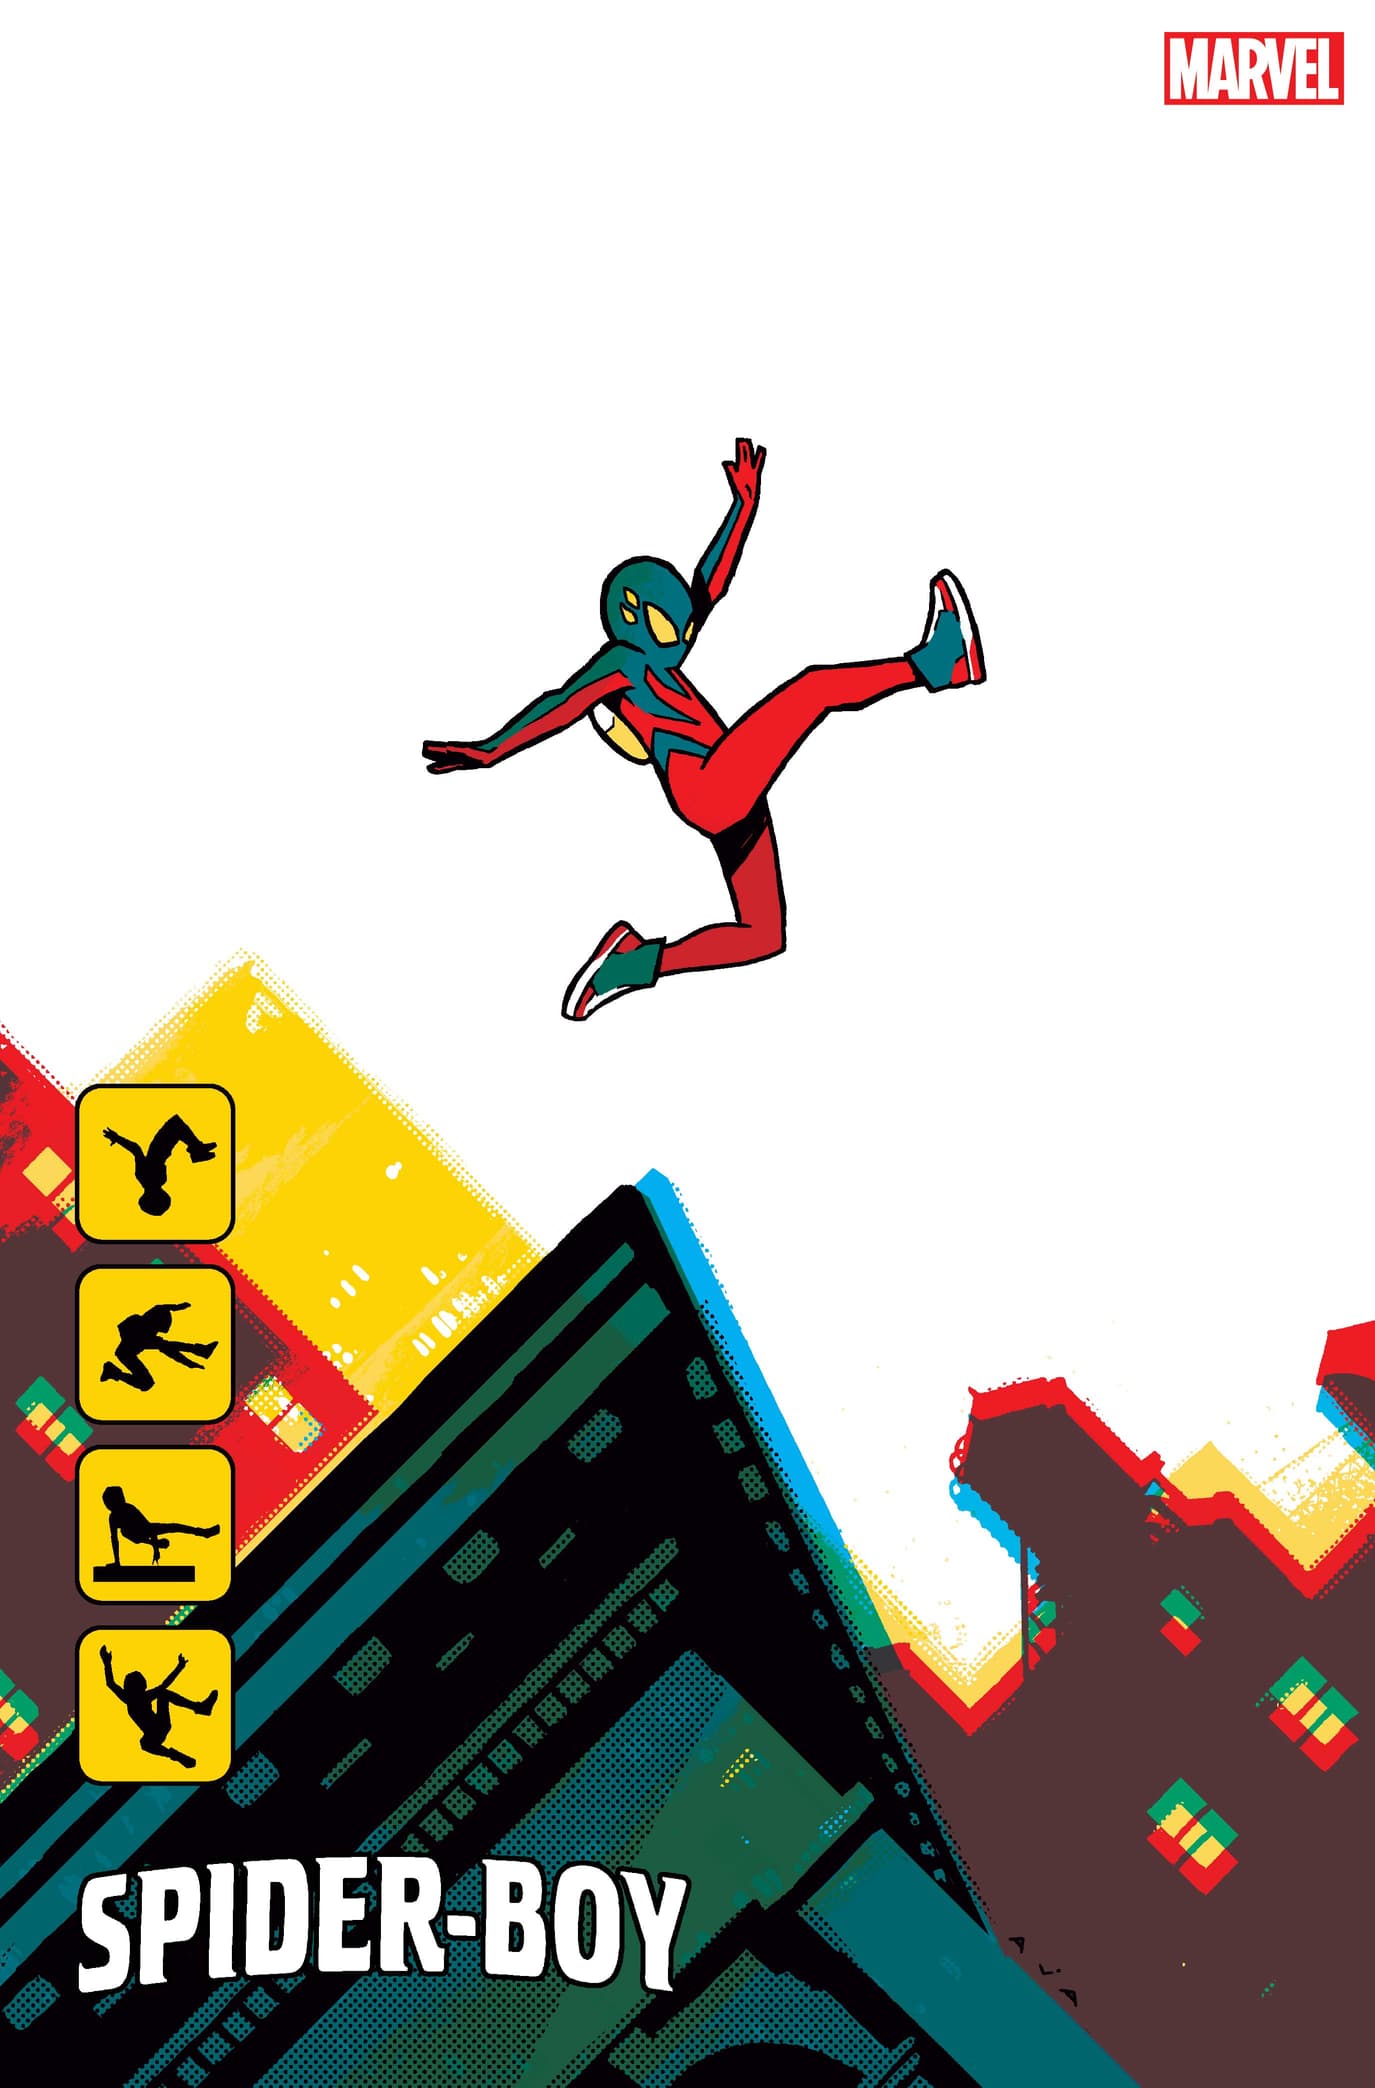 SPIDER-BOY #1 variant cover by David Aja